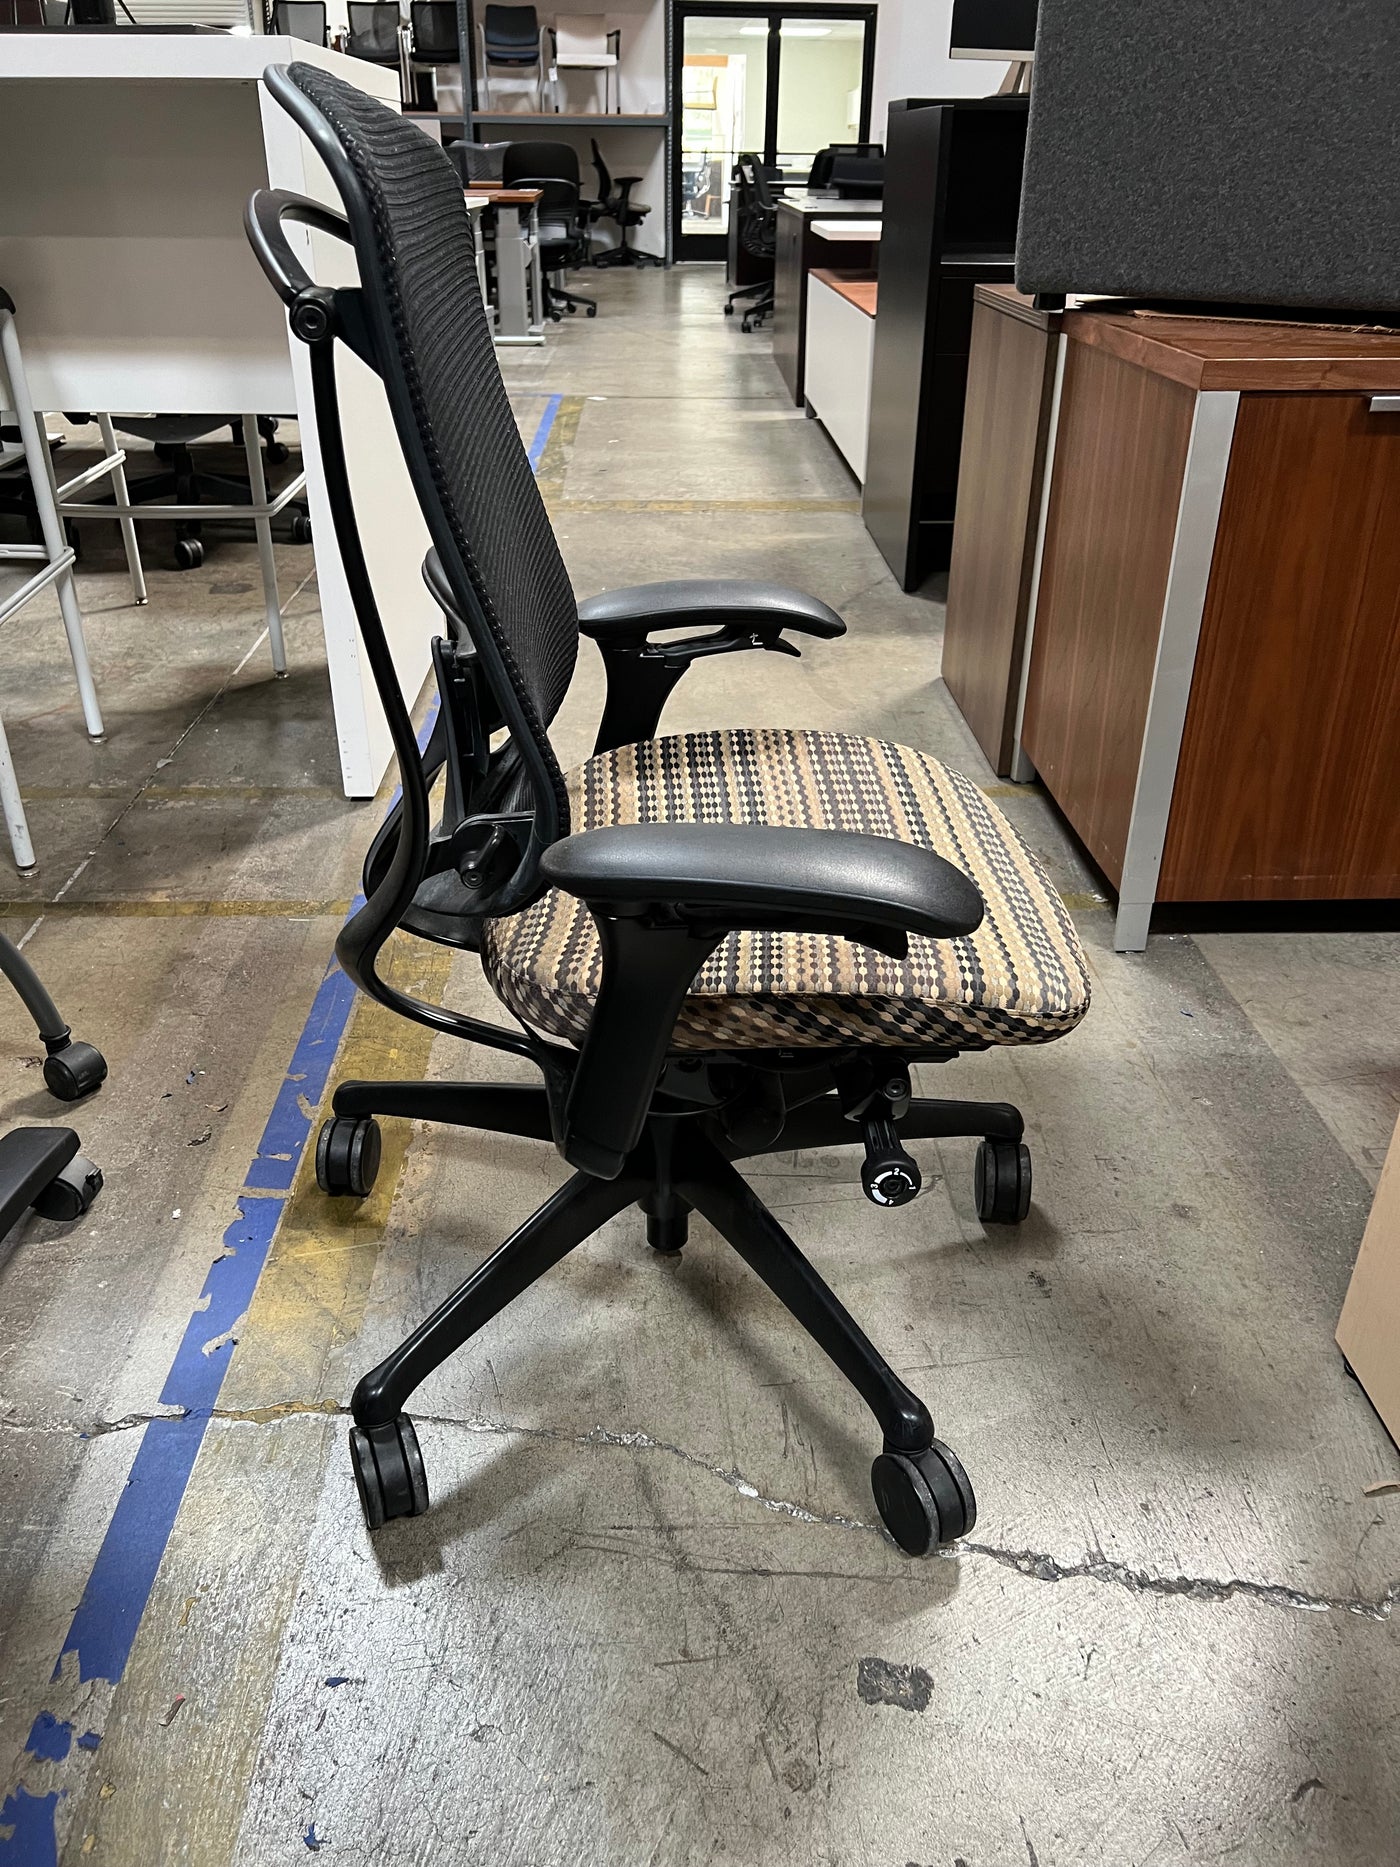 PRE OWNED TASK CHAIR - MULTIFUNTION